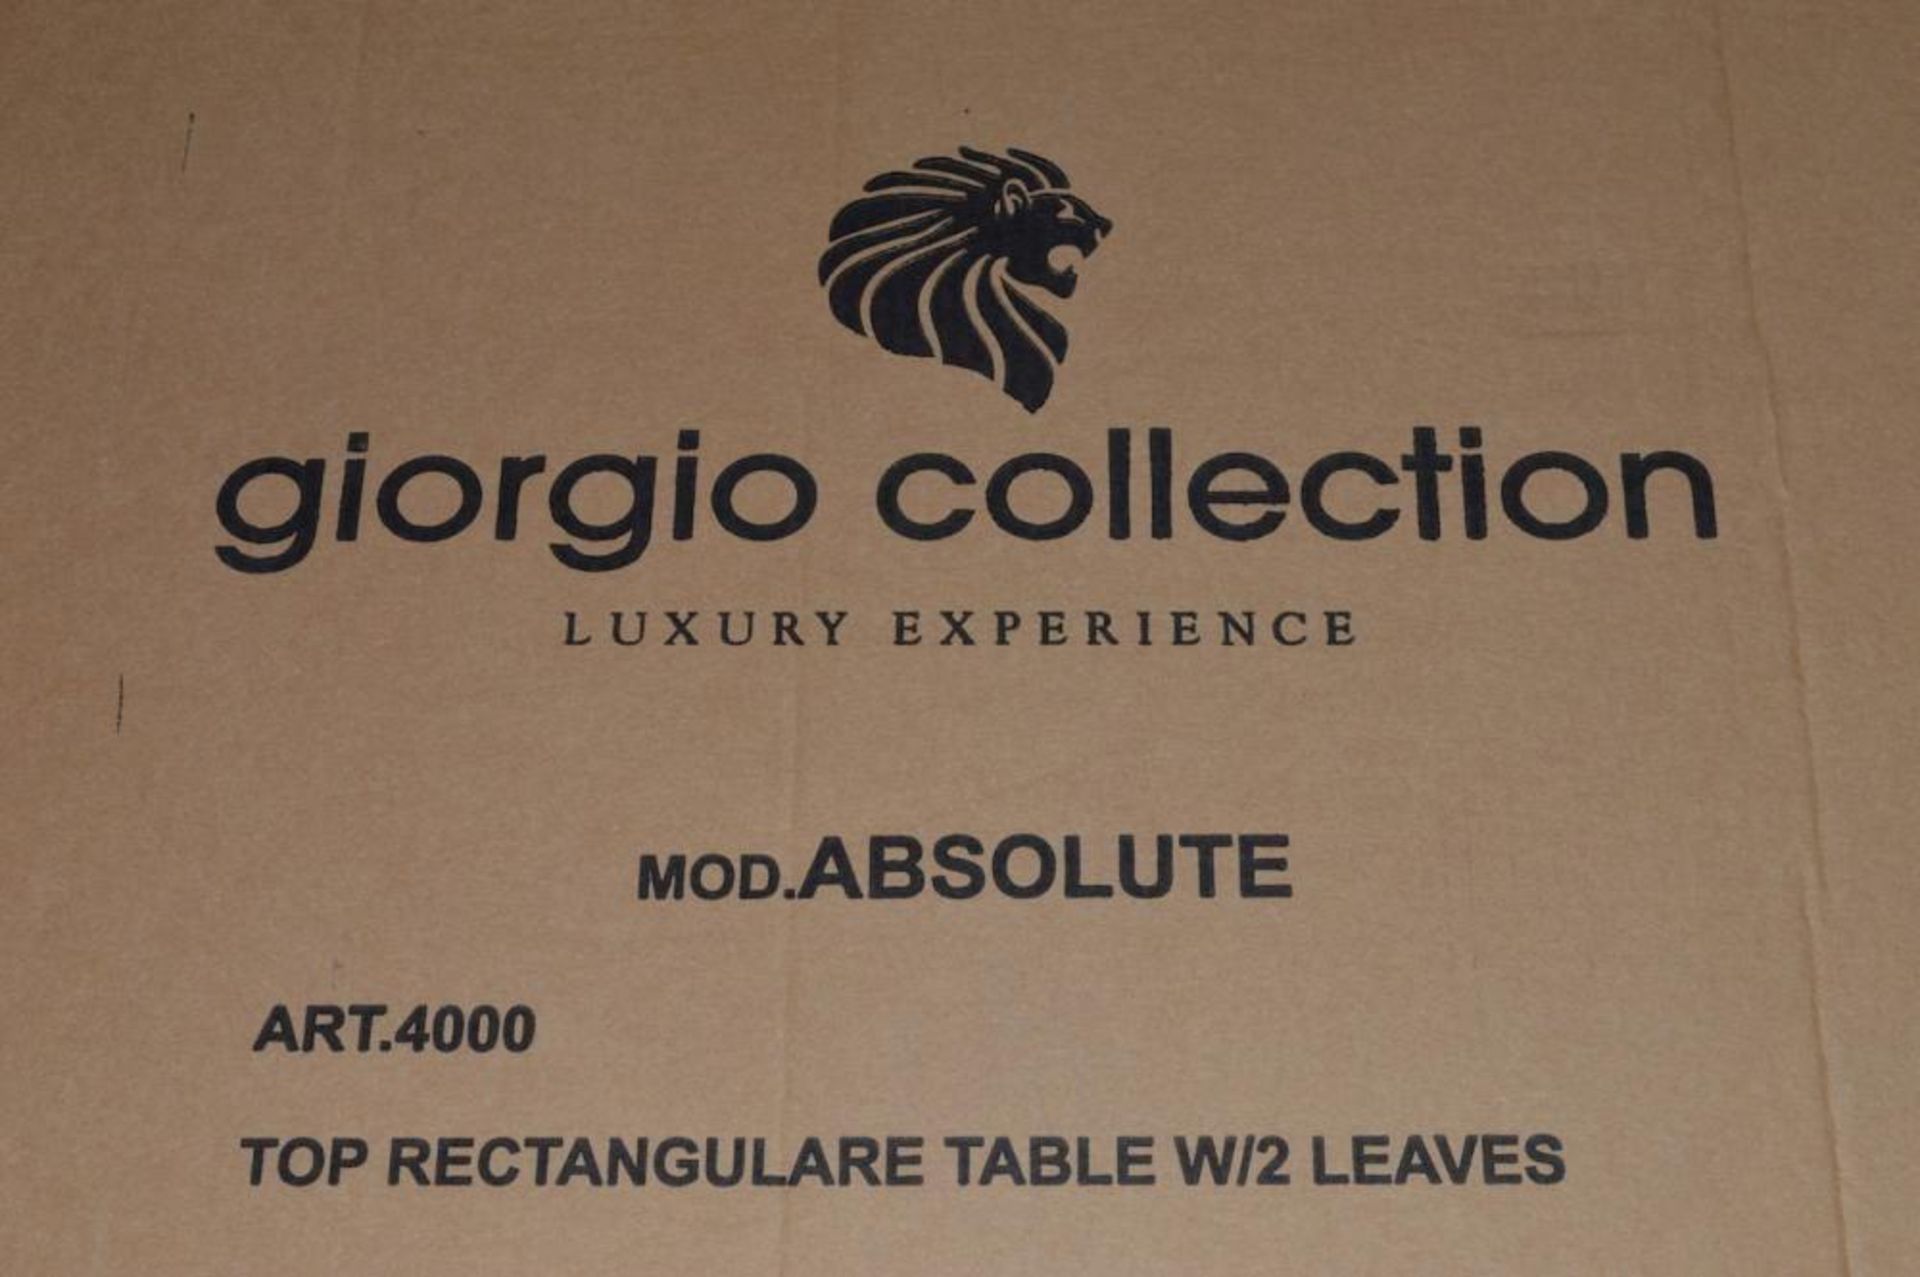 1 x Giorgio Absolute Dining Extension Table 4000 – Mako Japanese Tamos Burl Veneer With a High Gloss - Image 17 of 24